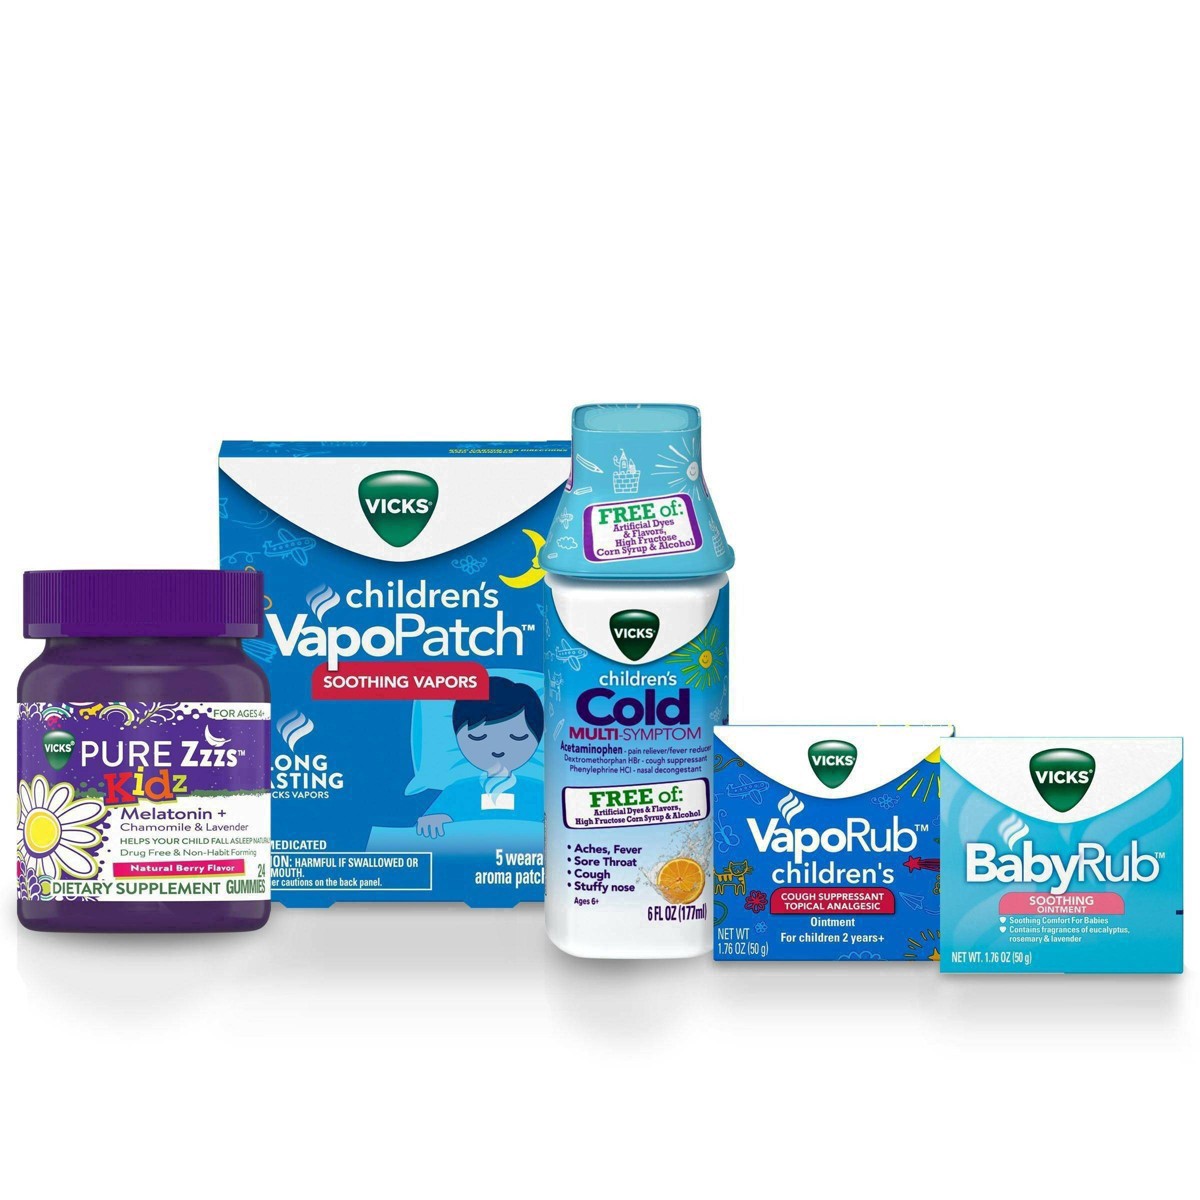 slide 10 of 37, Vicks Children's VapoPatch with Long Lasting Soothing Vapors - Menthol - 5ct, 5 ct